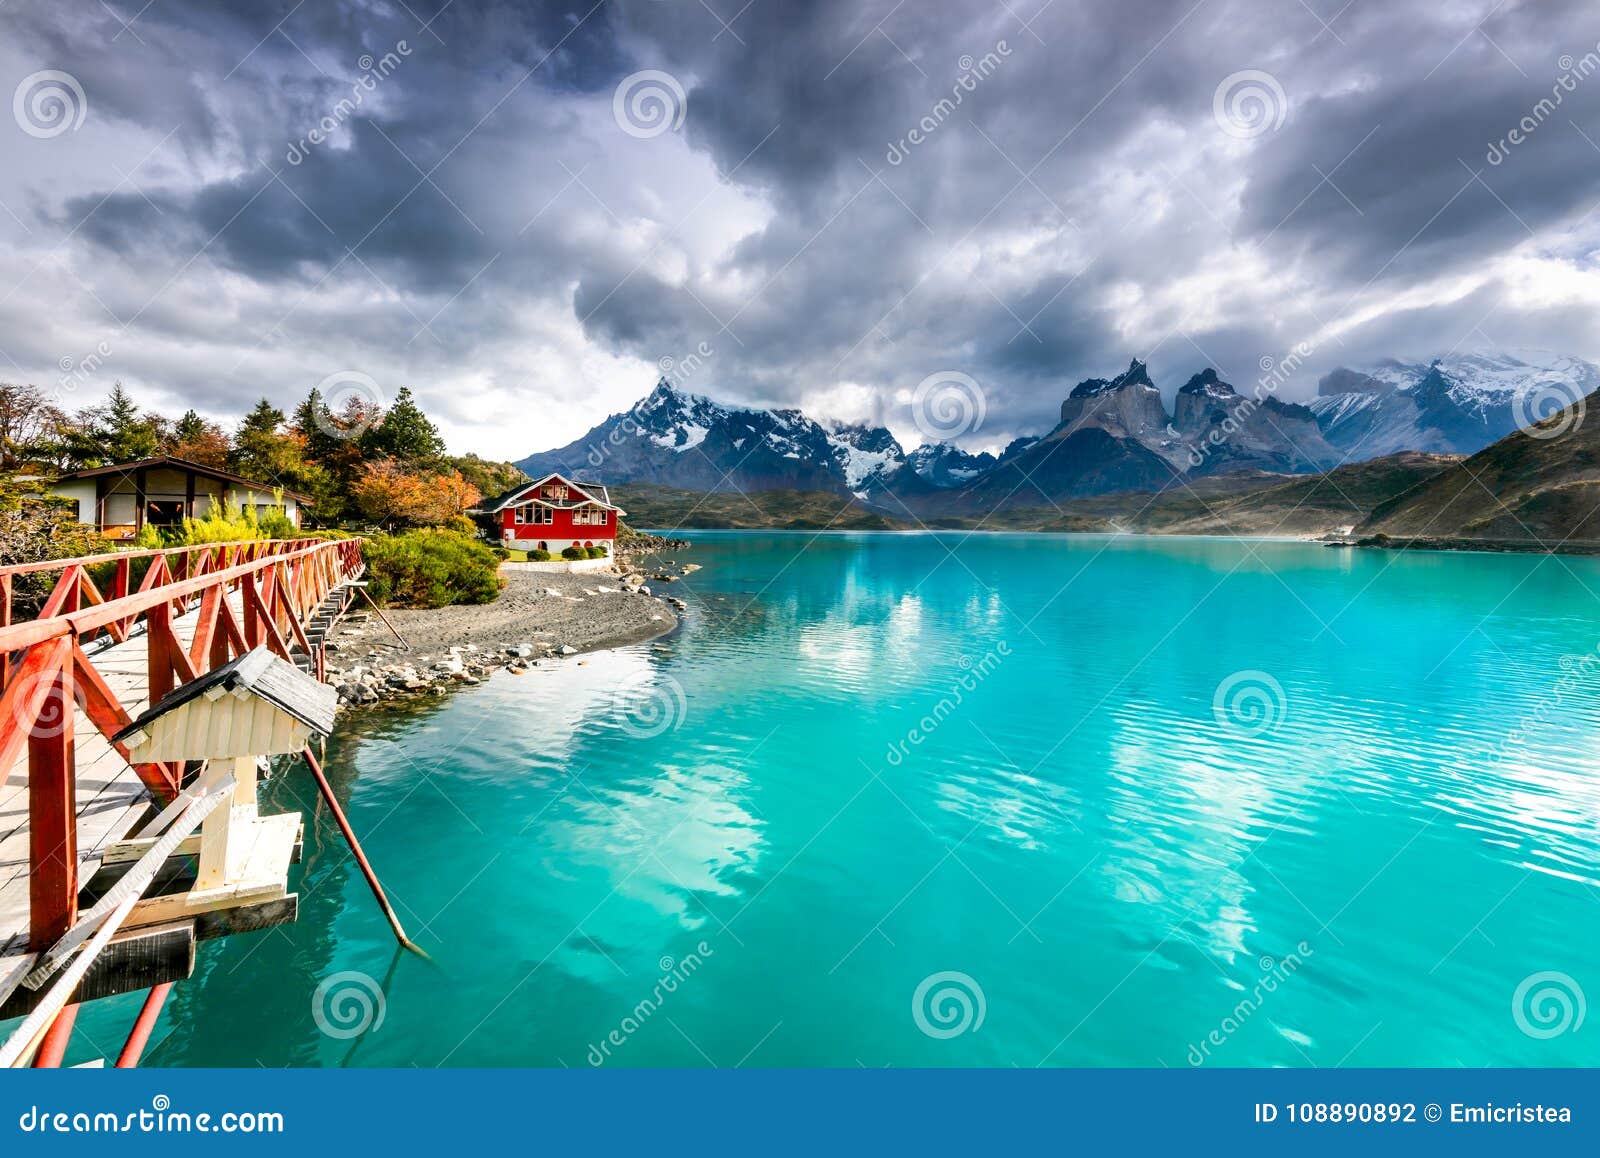 pehoe lake, torres del paine, patagonia, chile